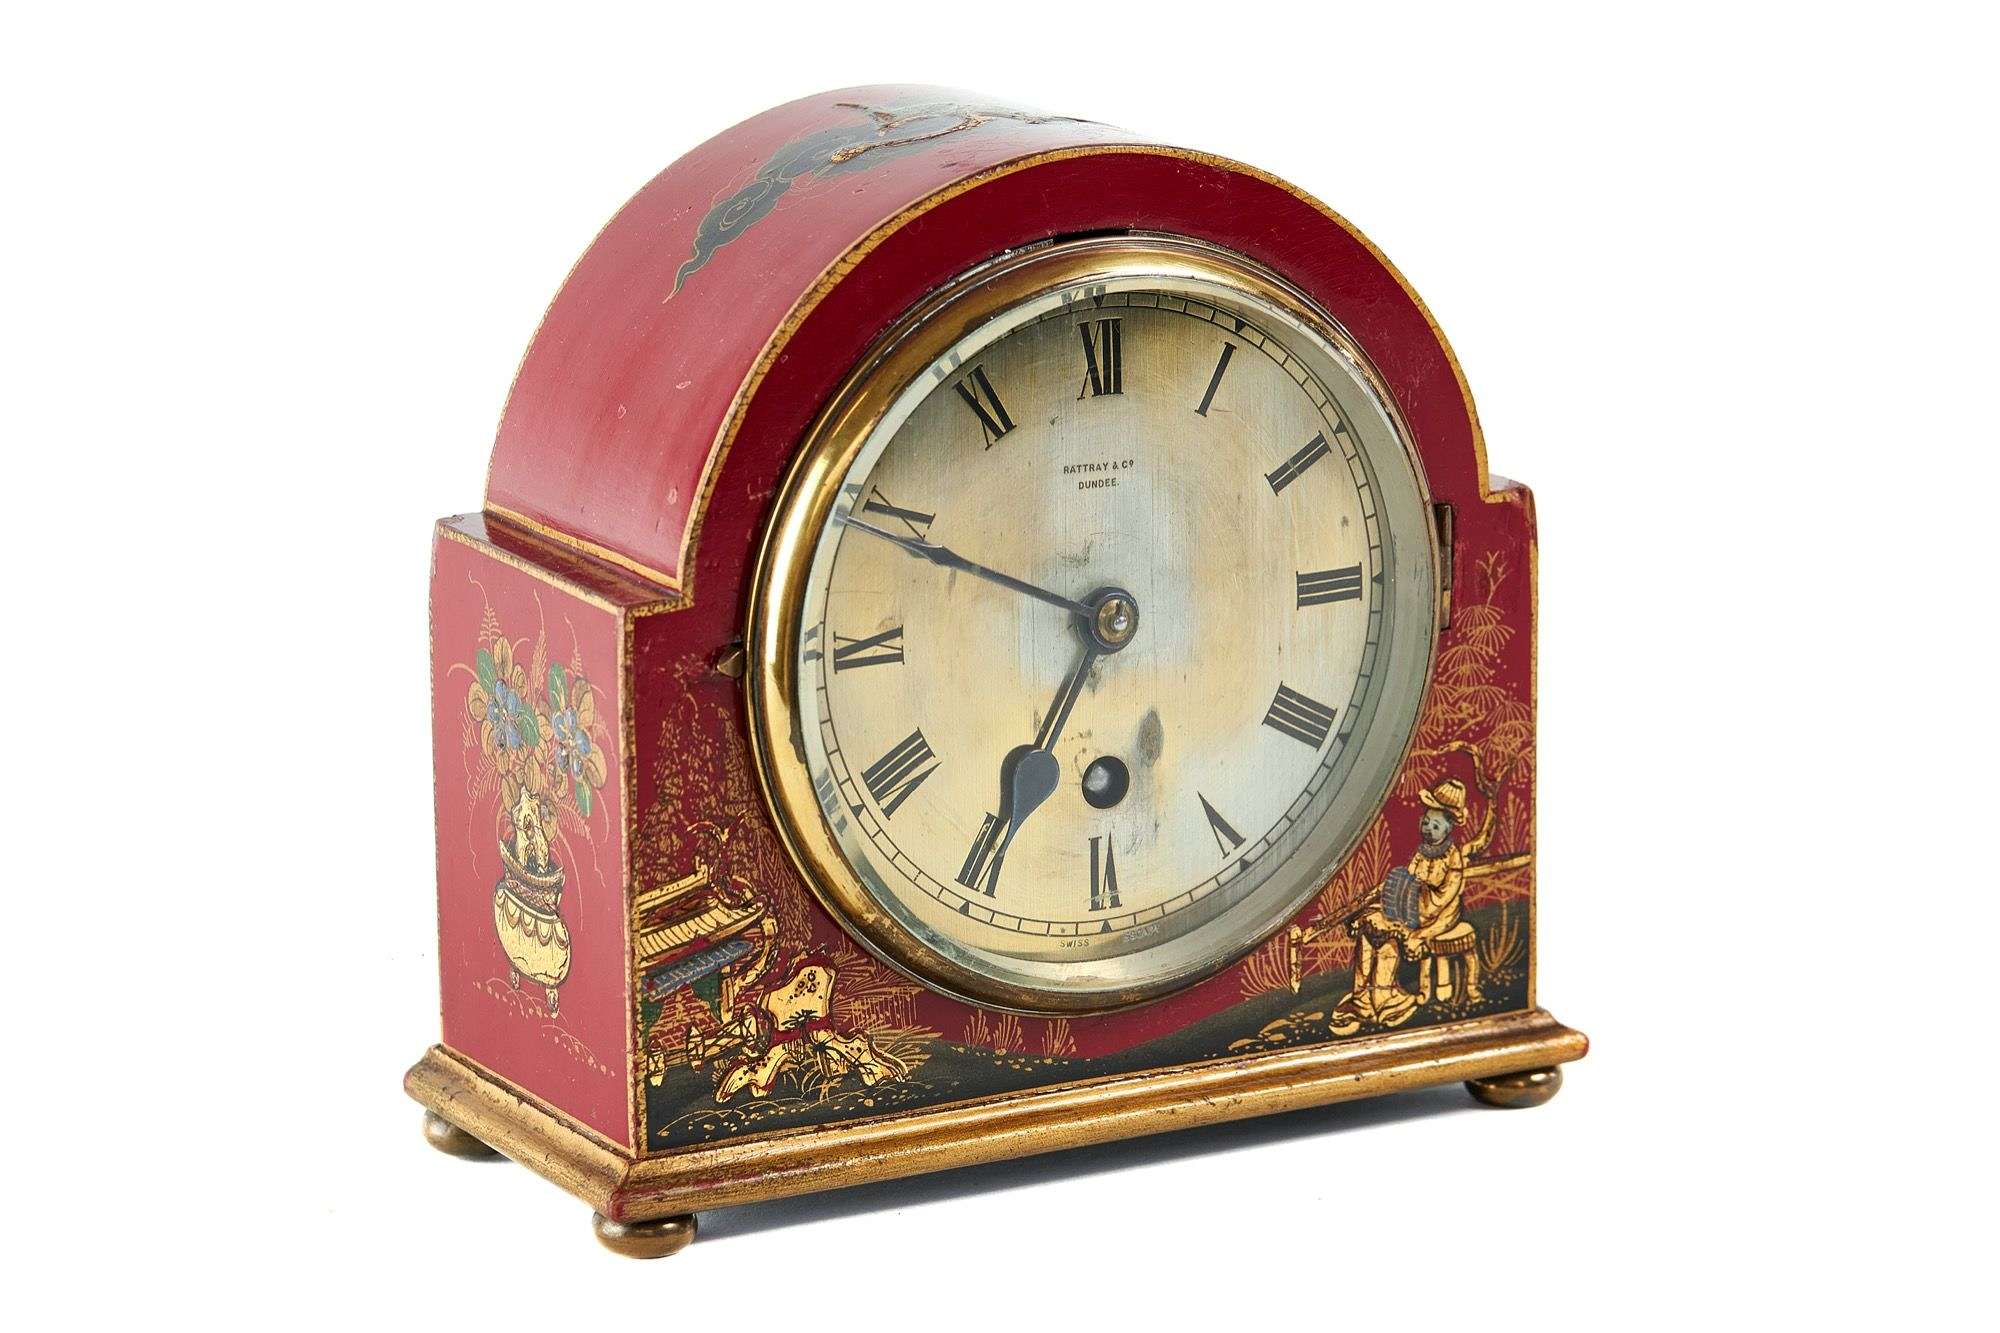 Red Chinoiserie decorated Mantel clock circa 1920s